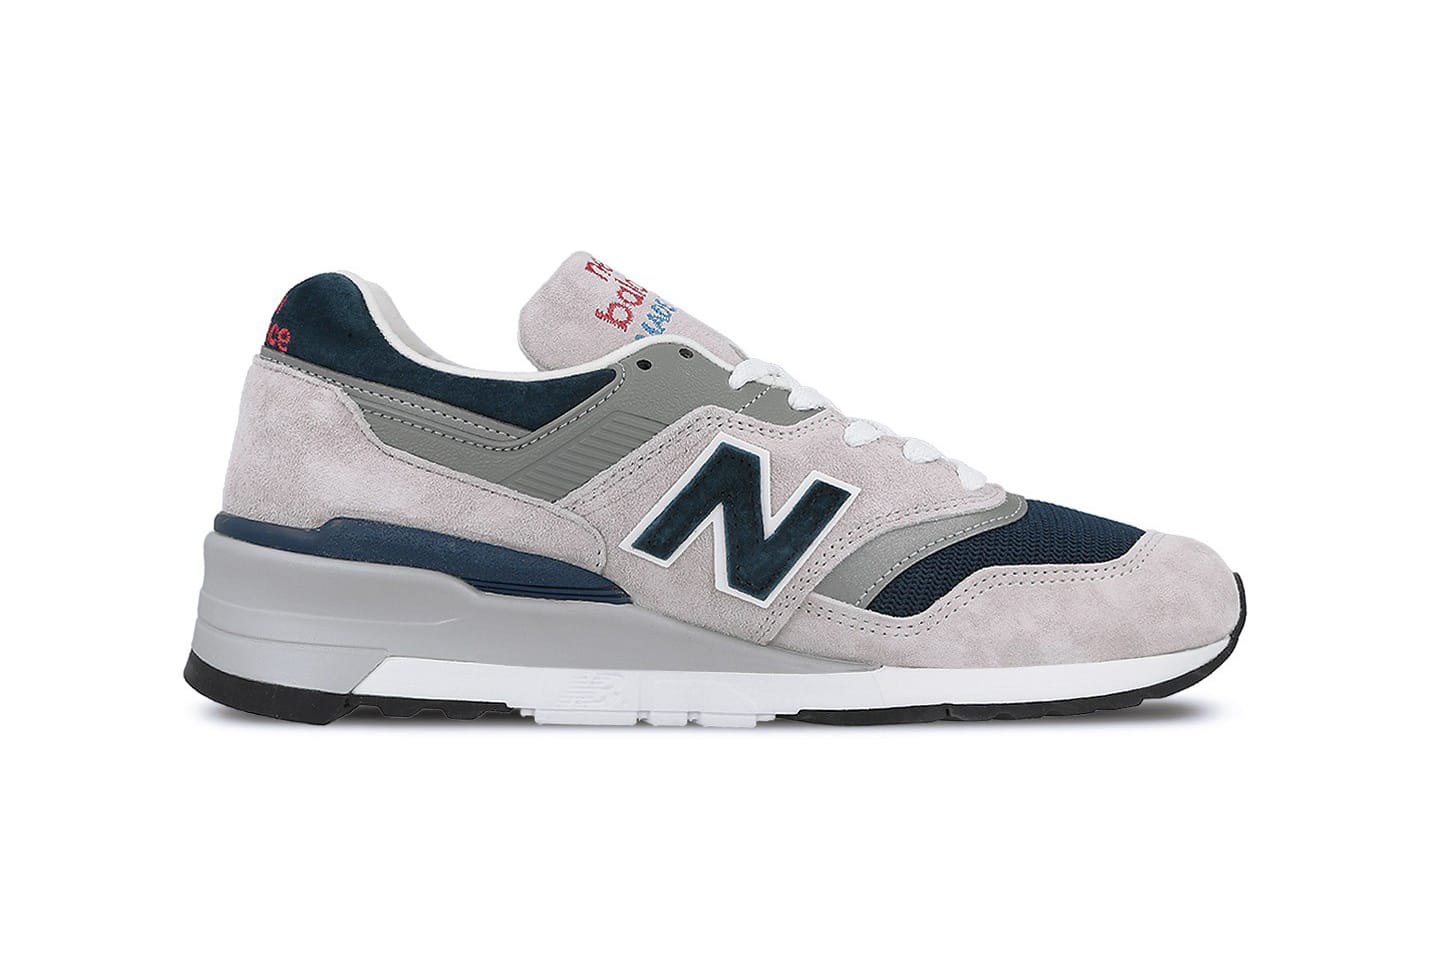 New Balance Drops Understated New 997 Colorway | HYPEBEAST